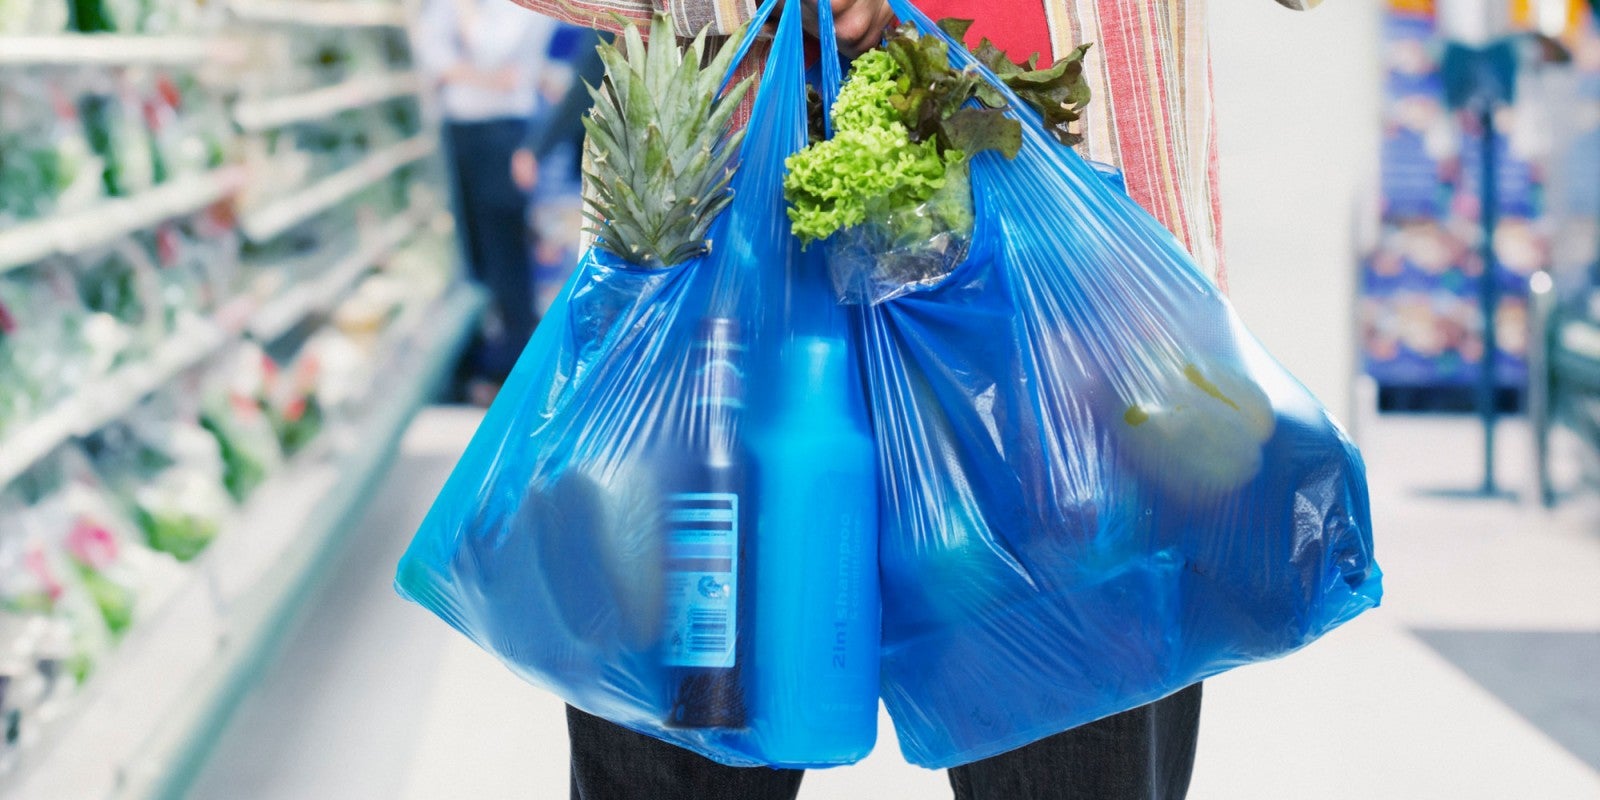 Is Free Plastic Bags Really What Malaysians Need? - WORLD OF BUZZ 2